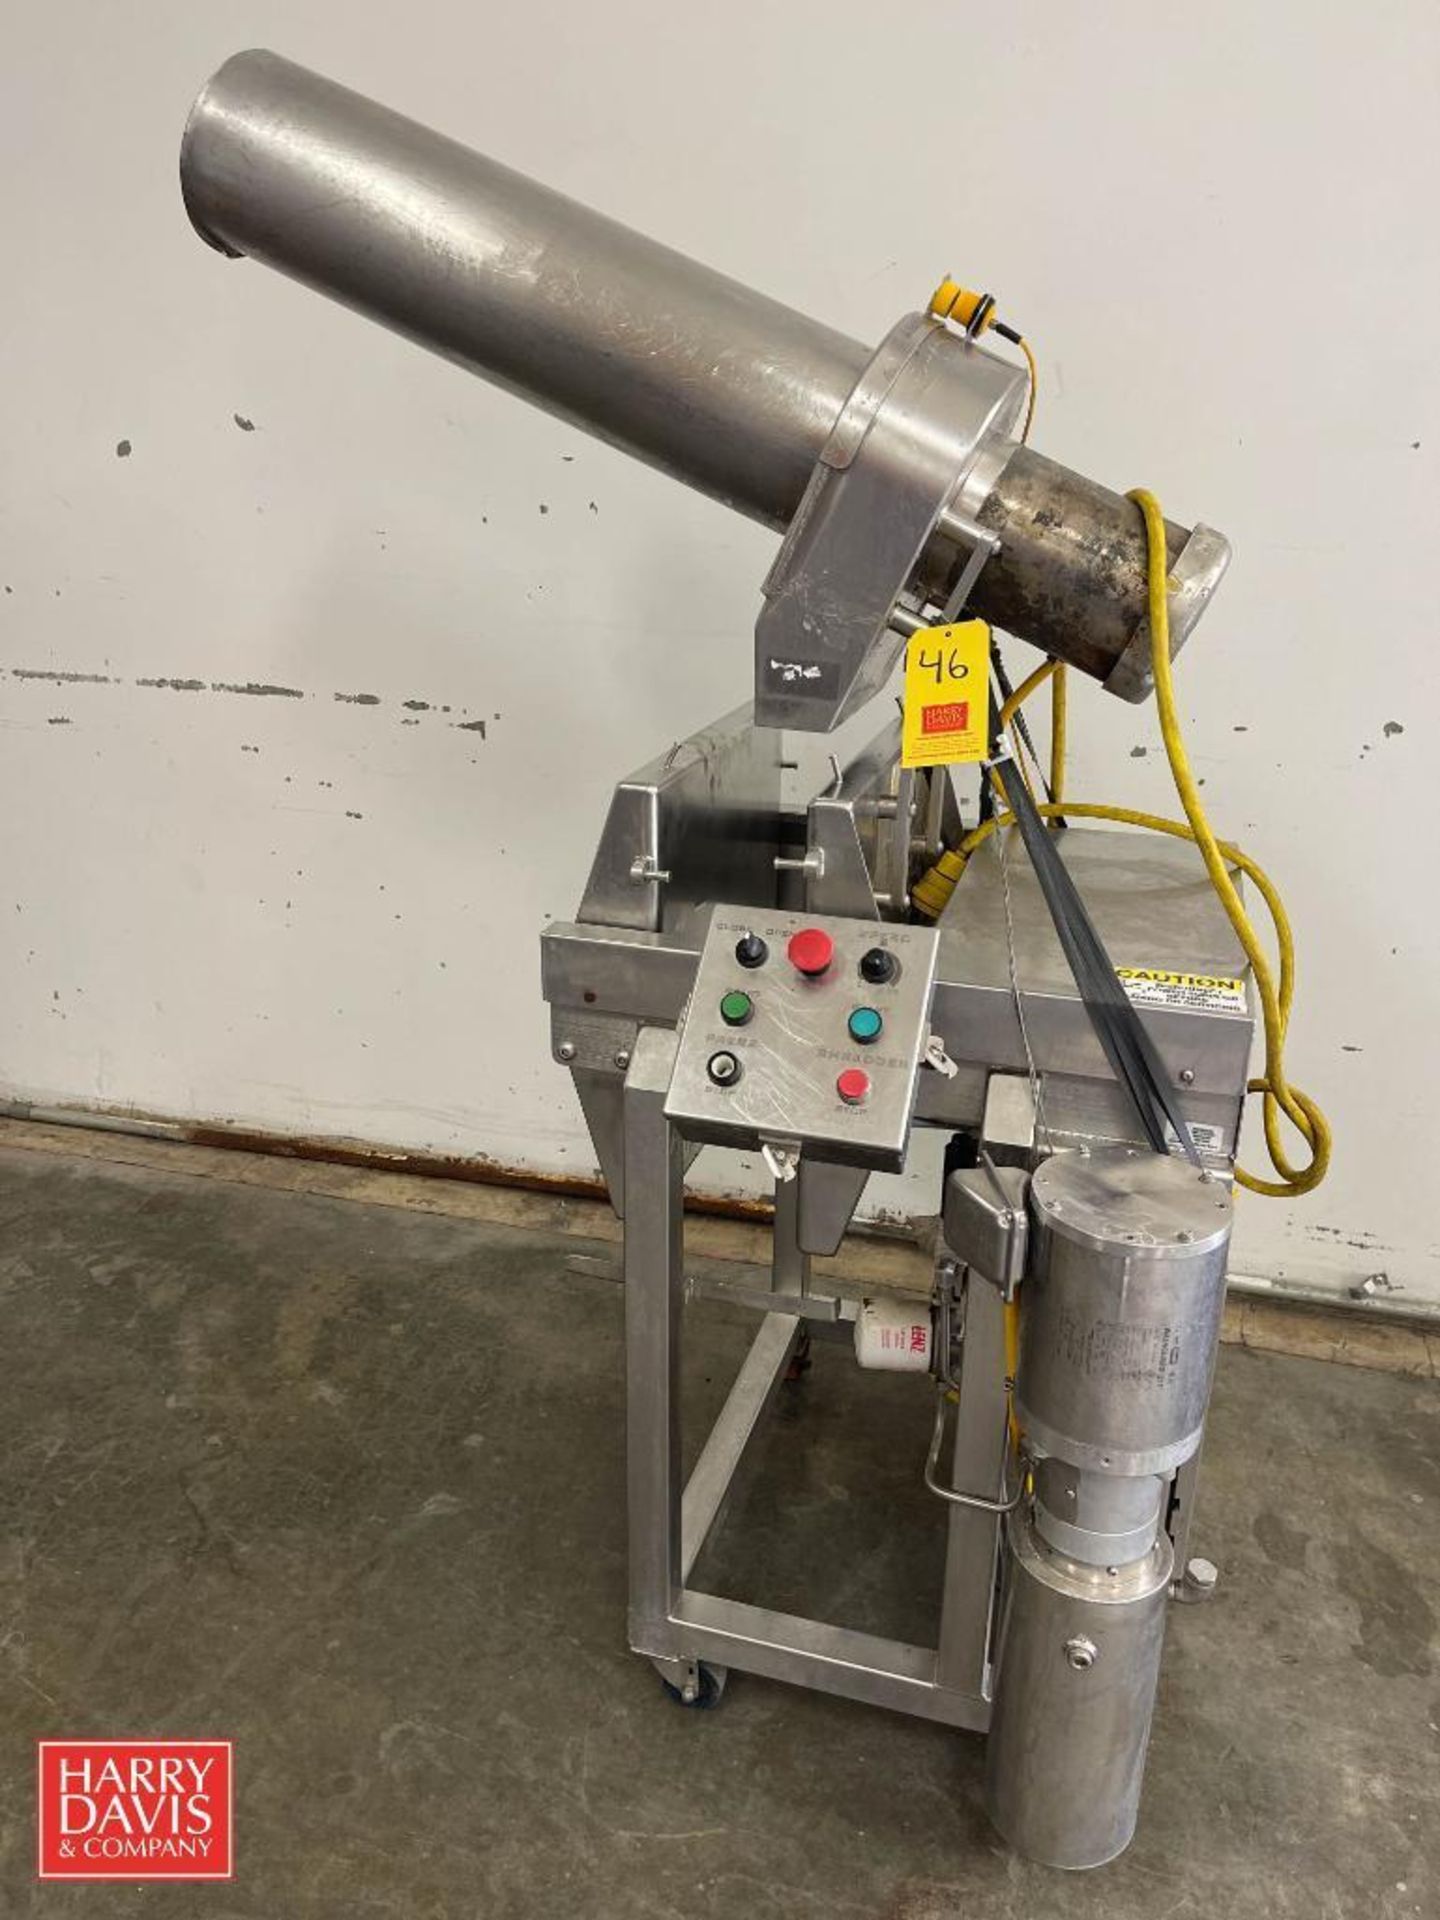 Juiced Rite Juicer, Model: 100, S/N: 7387 with Shredder and ABB Controls - Rigging Fee: $250